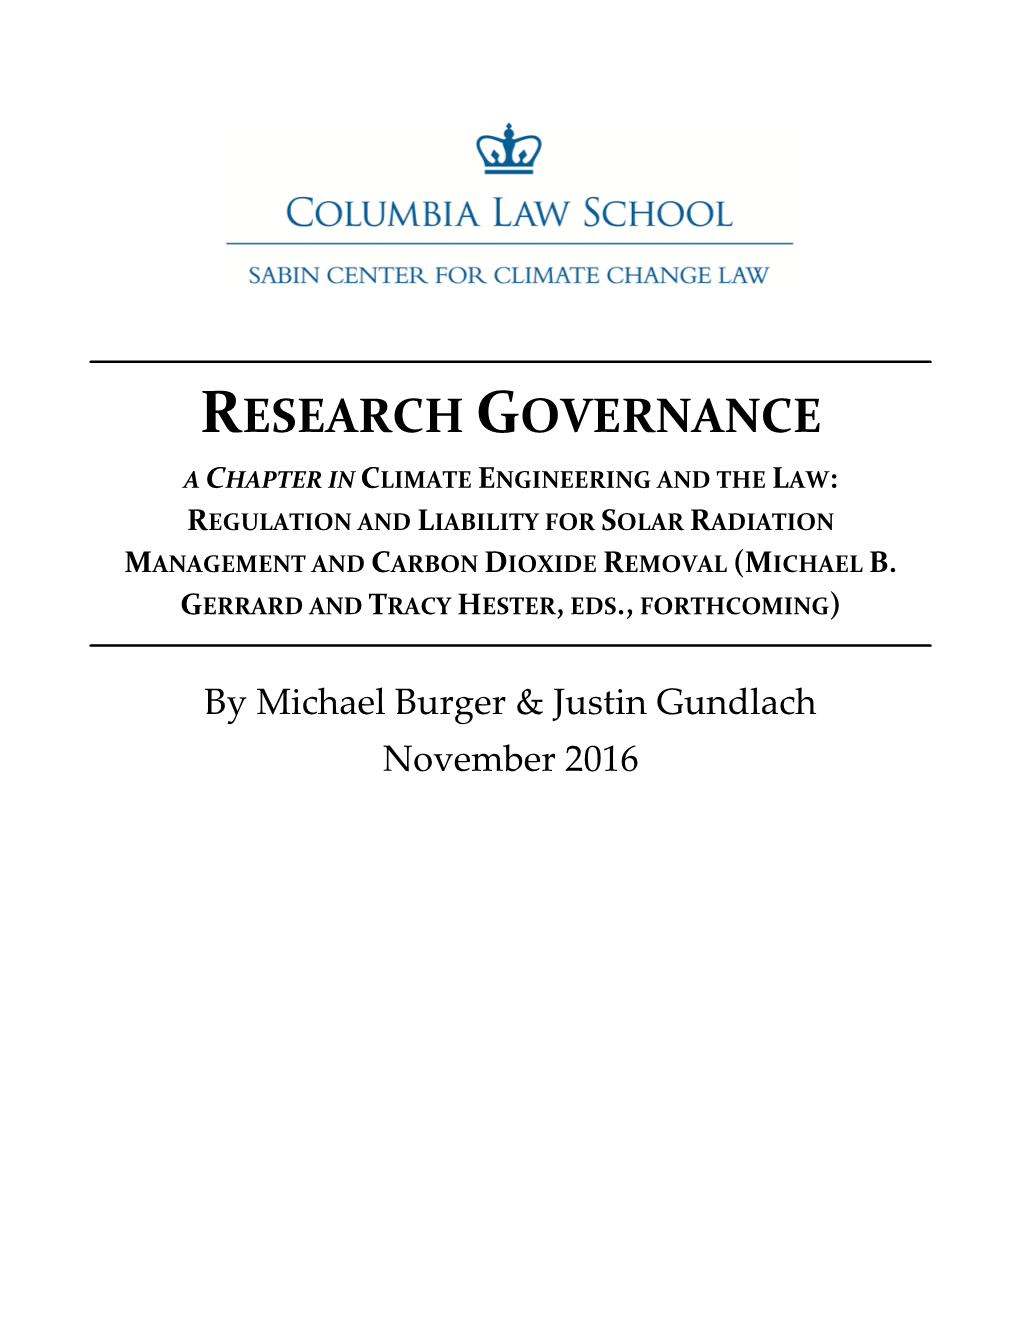 Climate Engineering Research Governance in Four Parts